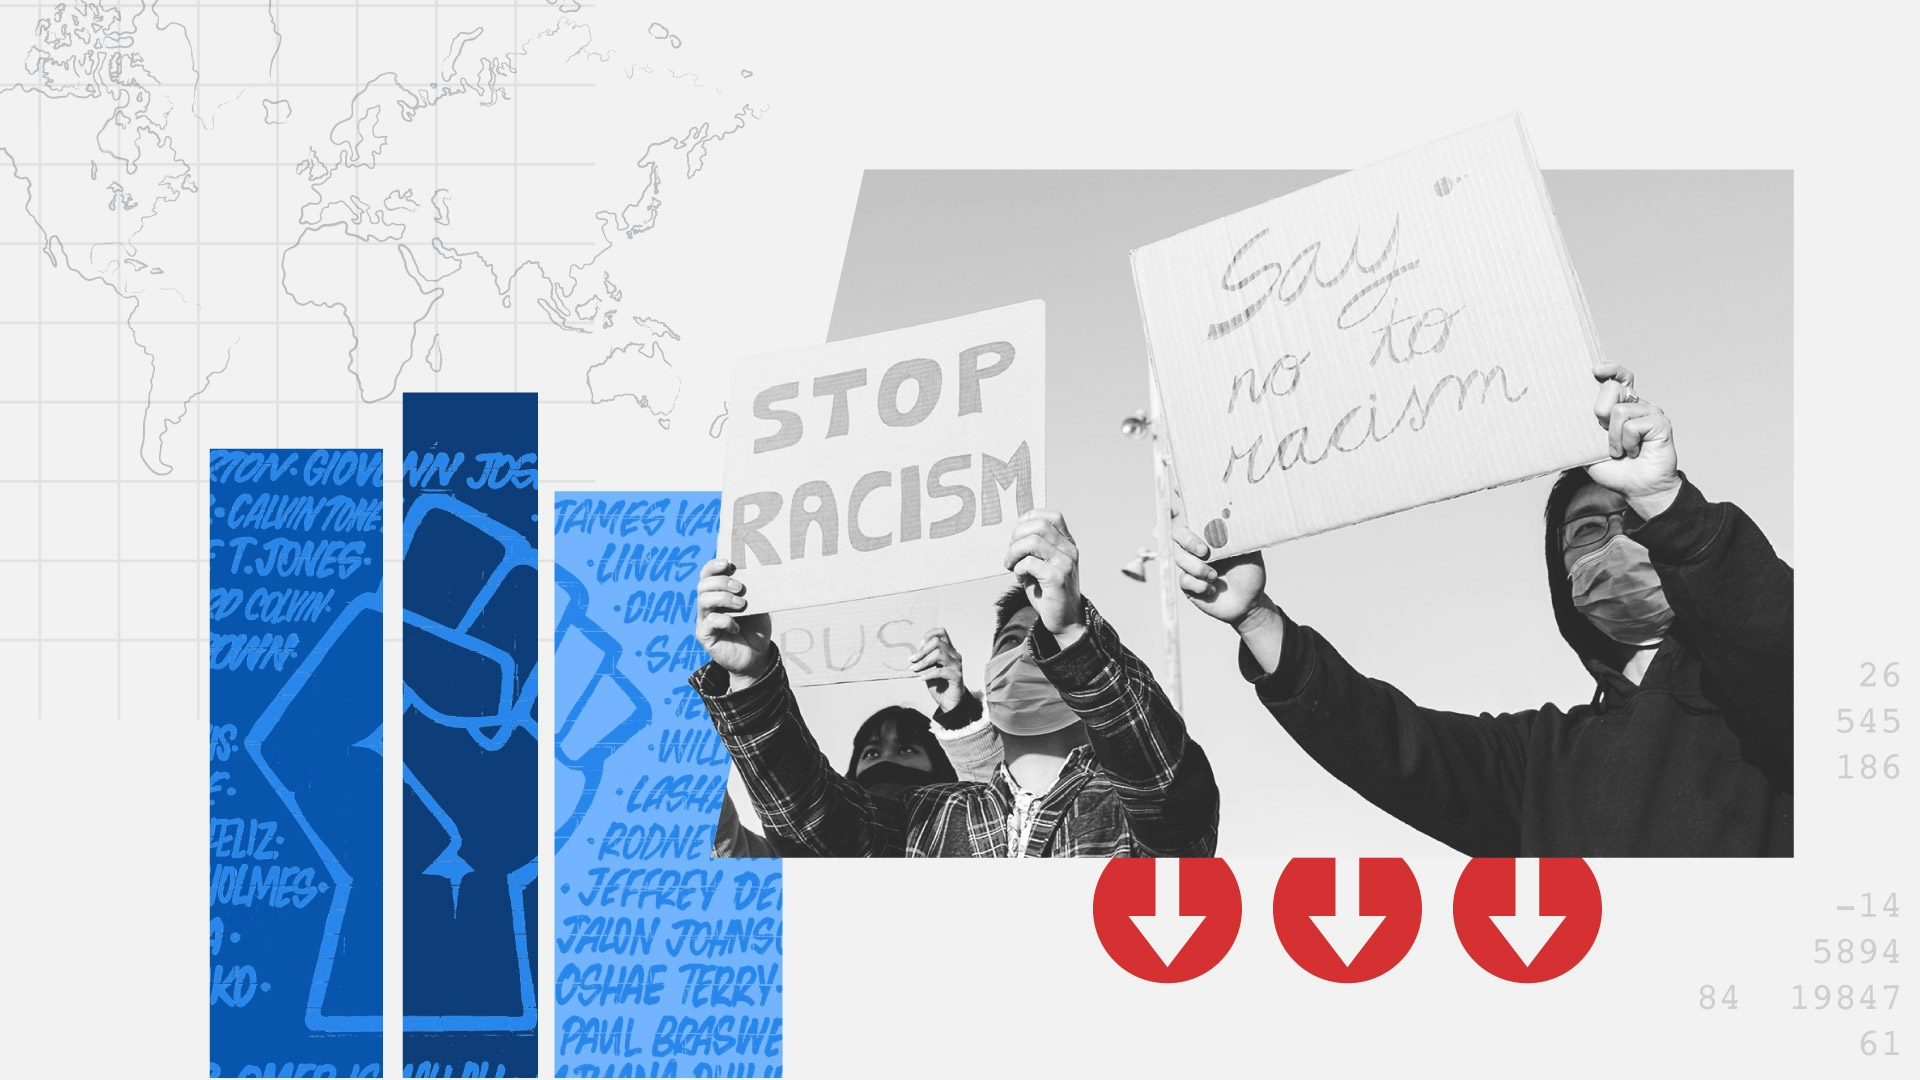 Graphic depicting protesters with signs featuring raised fist and reading "stop racism" and "say no to racism"